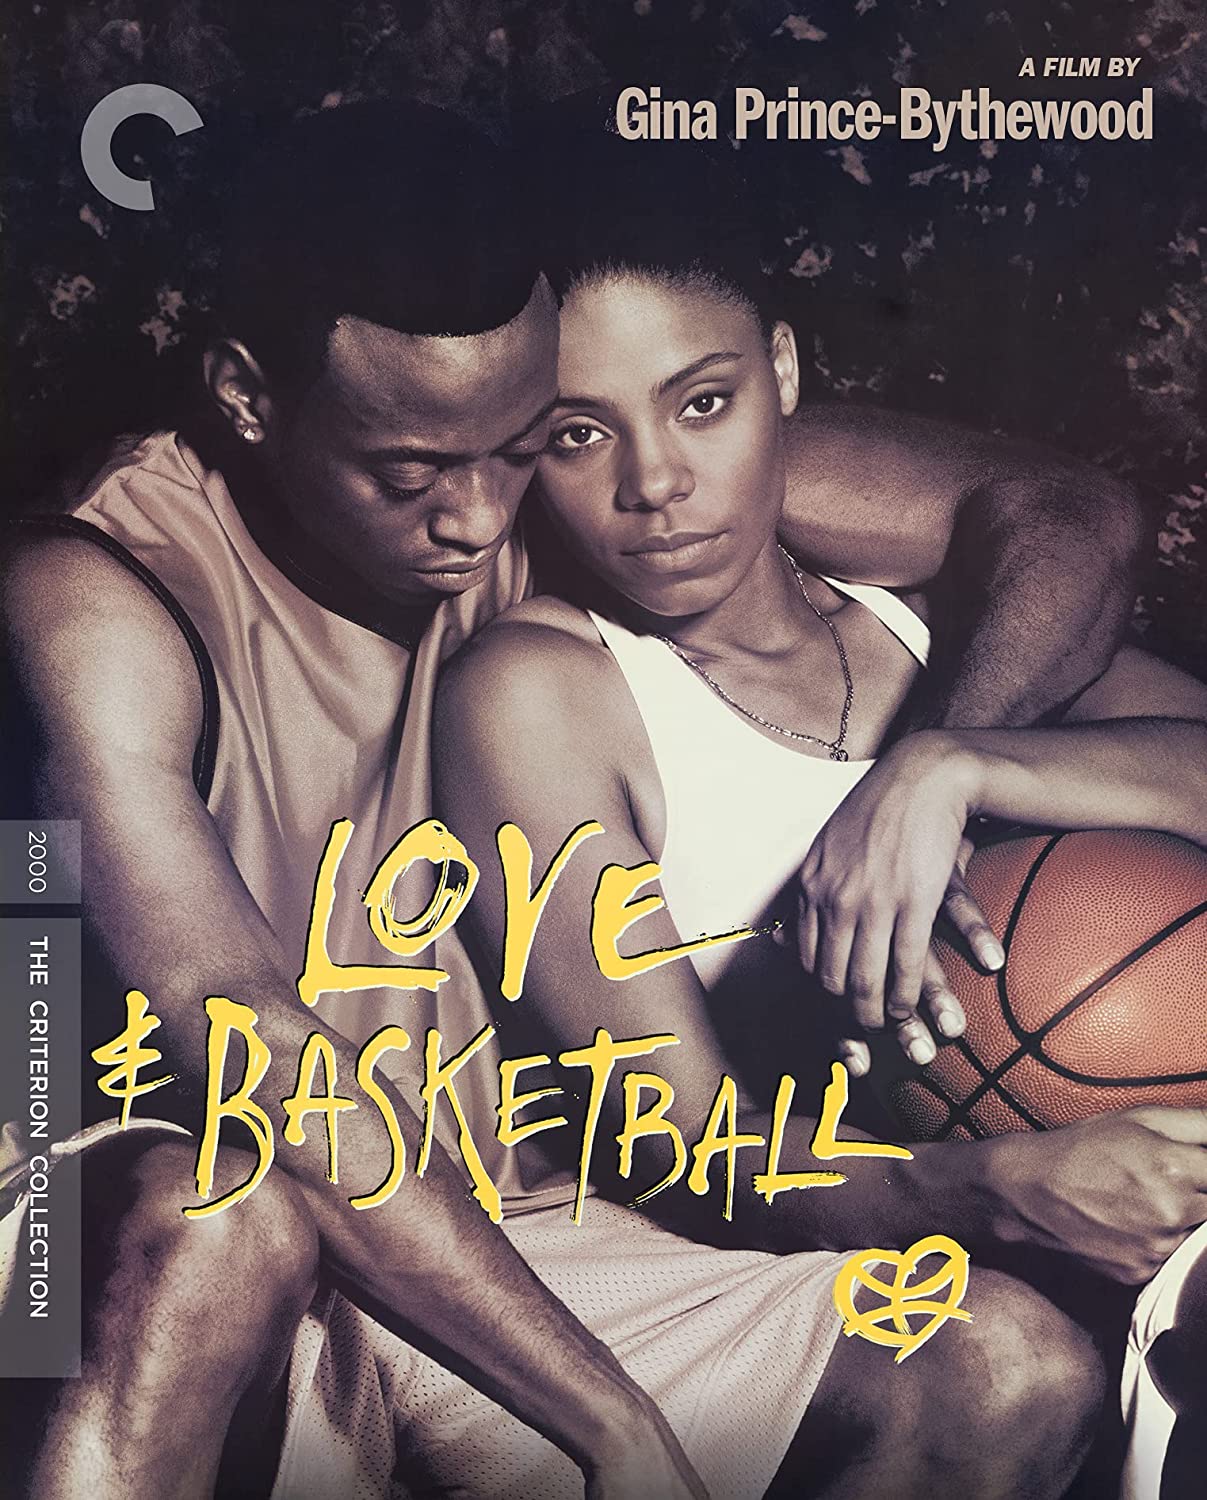 Love & Basketball [Blu-ray] [Criterion Collection] cover art